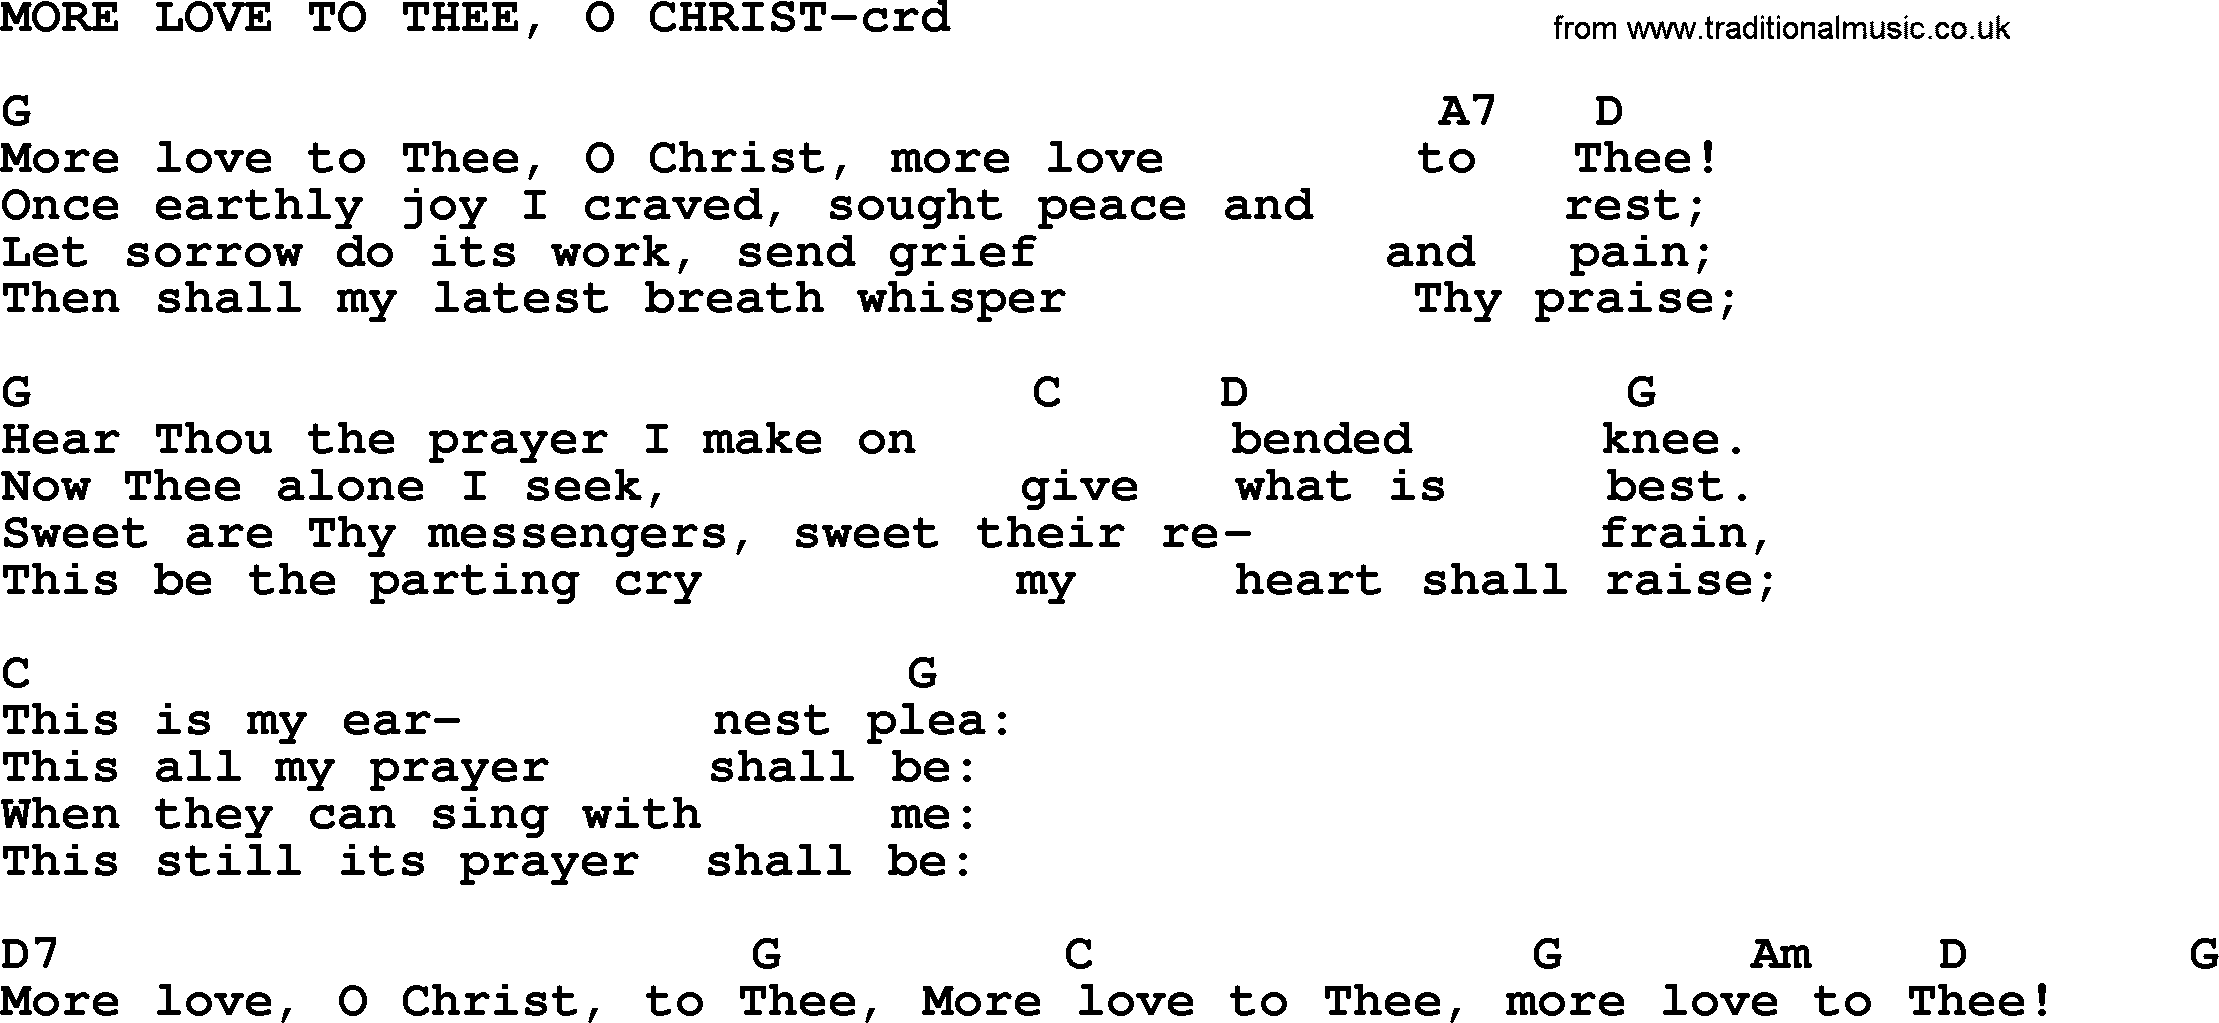 Top 500 Hymn: More Love To Thee, O Christ, lyrics and chords